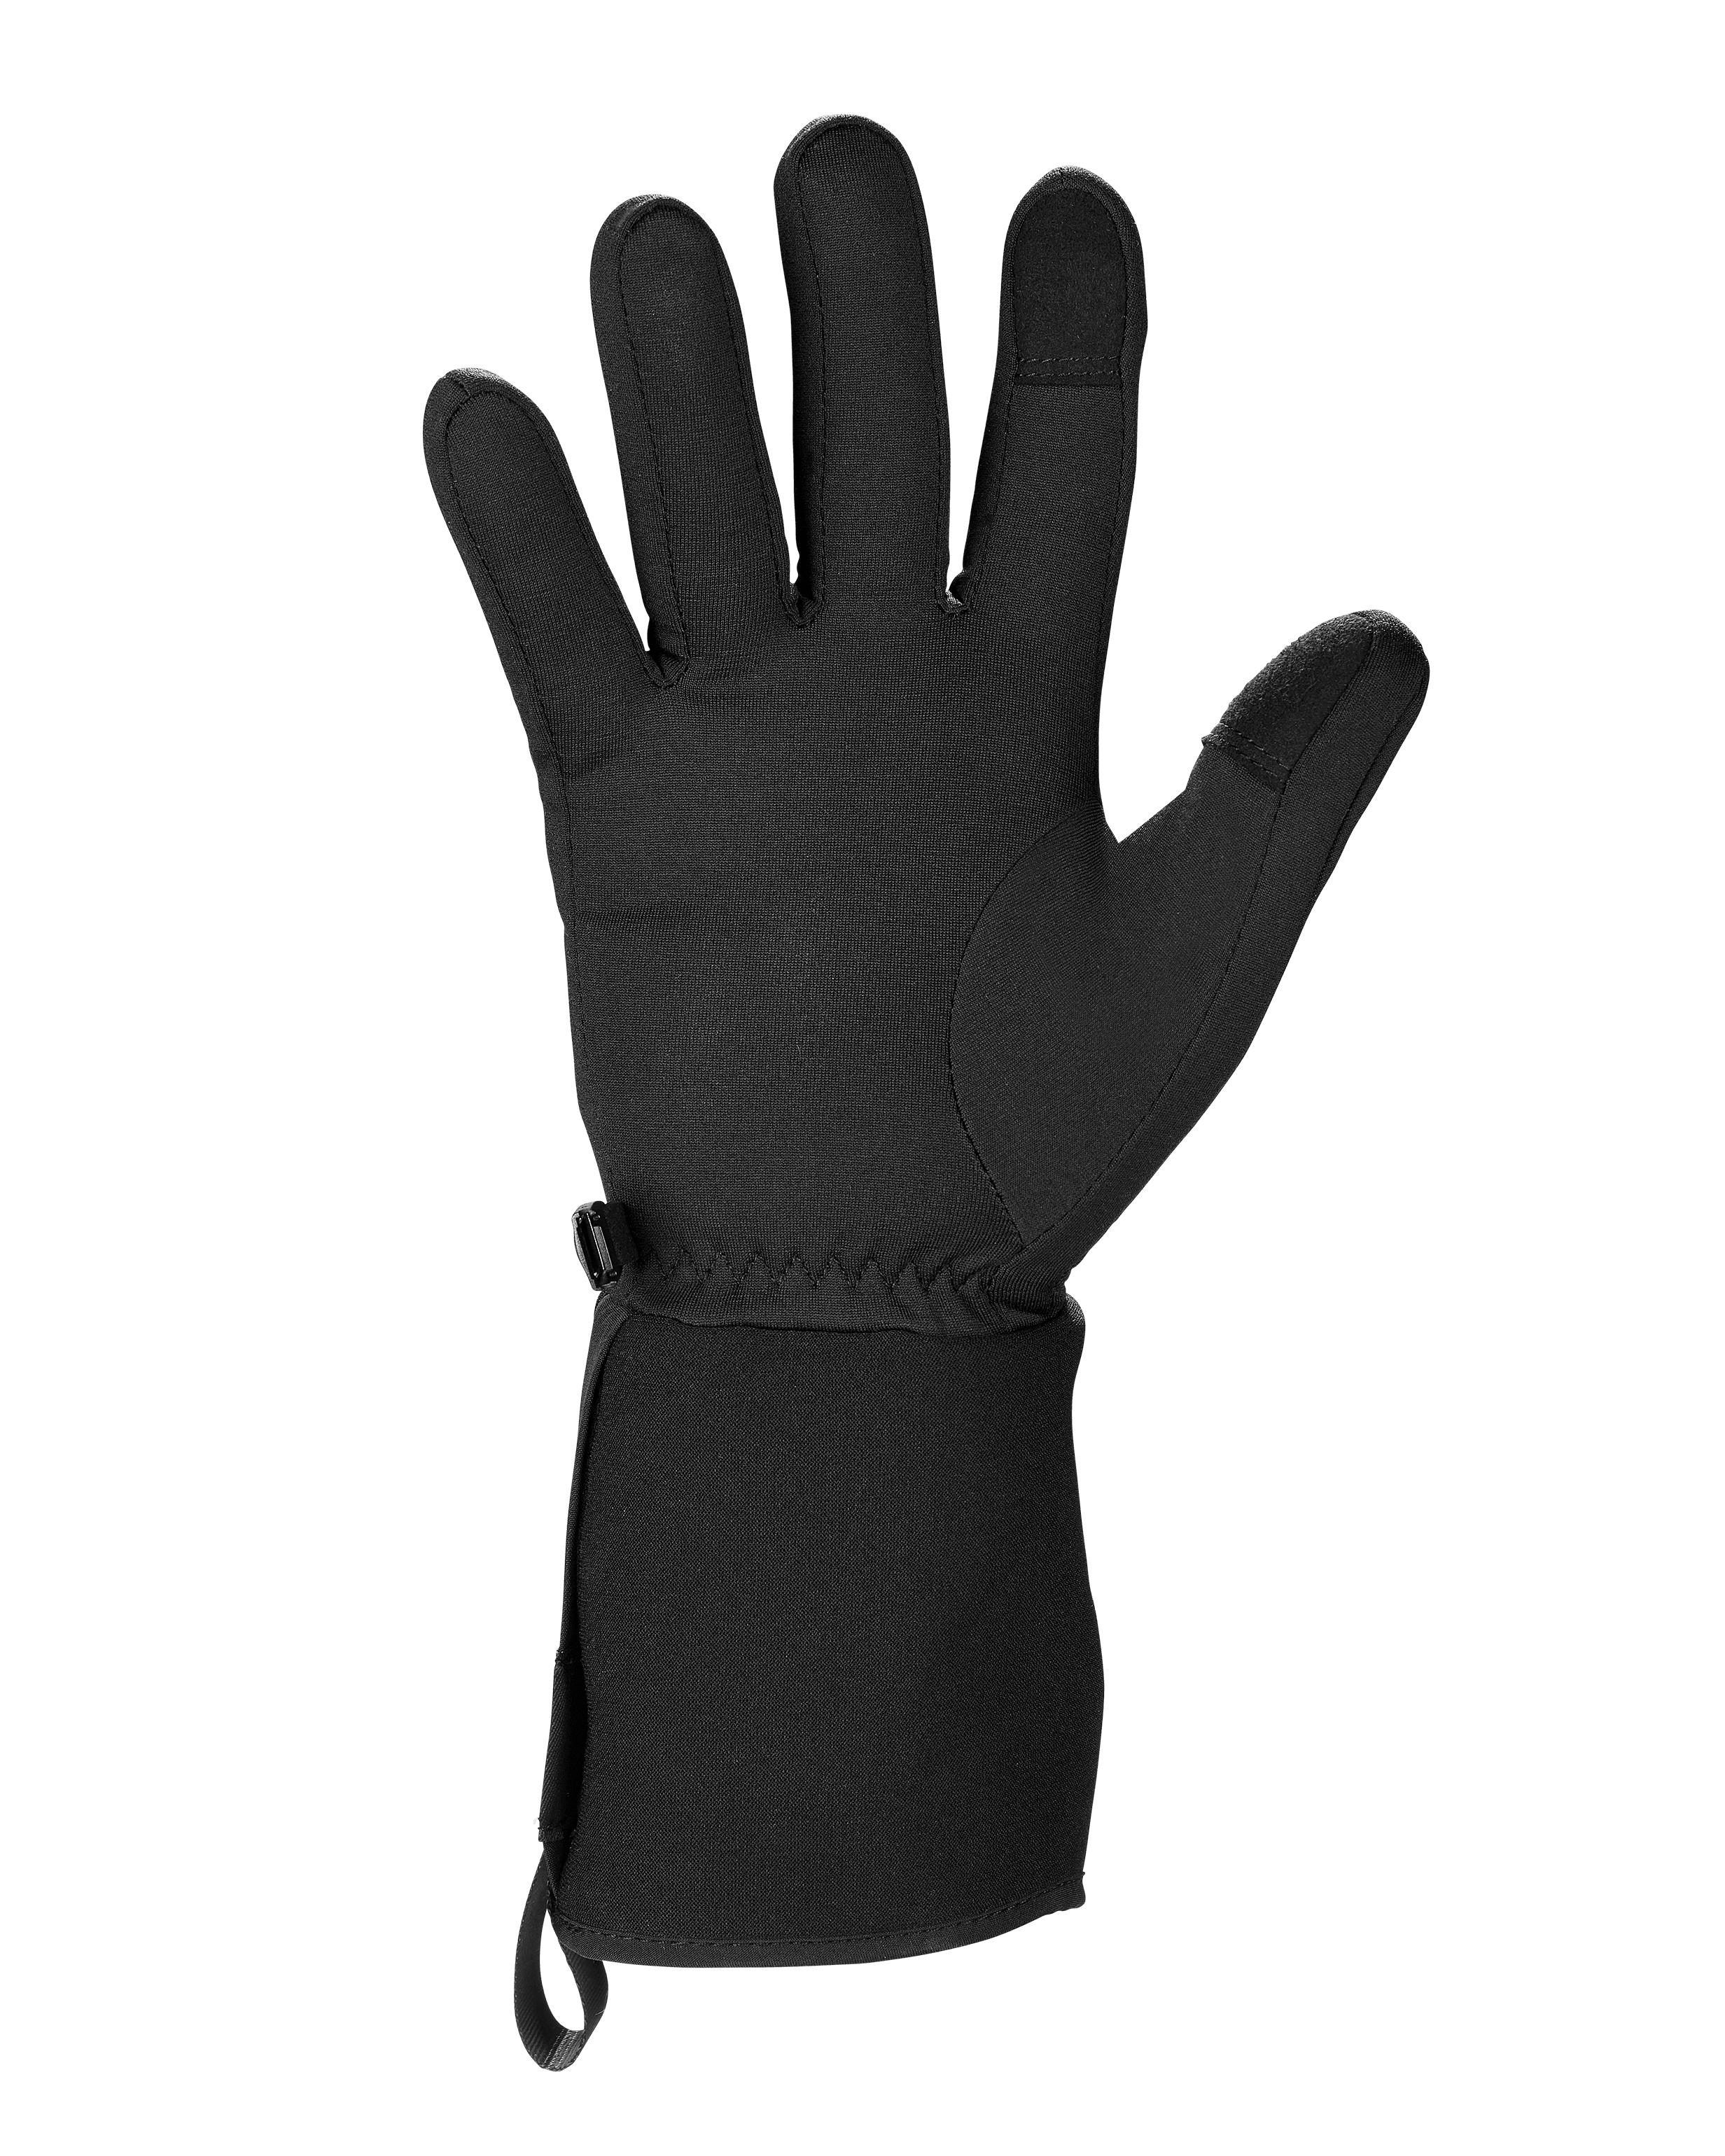 SnapConnect Heated Glove Liners